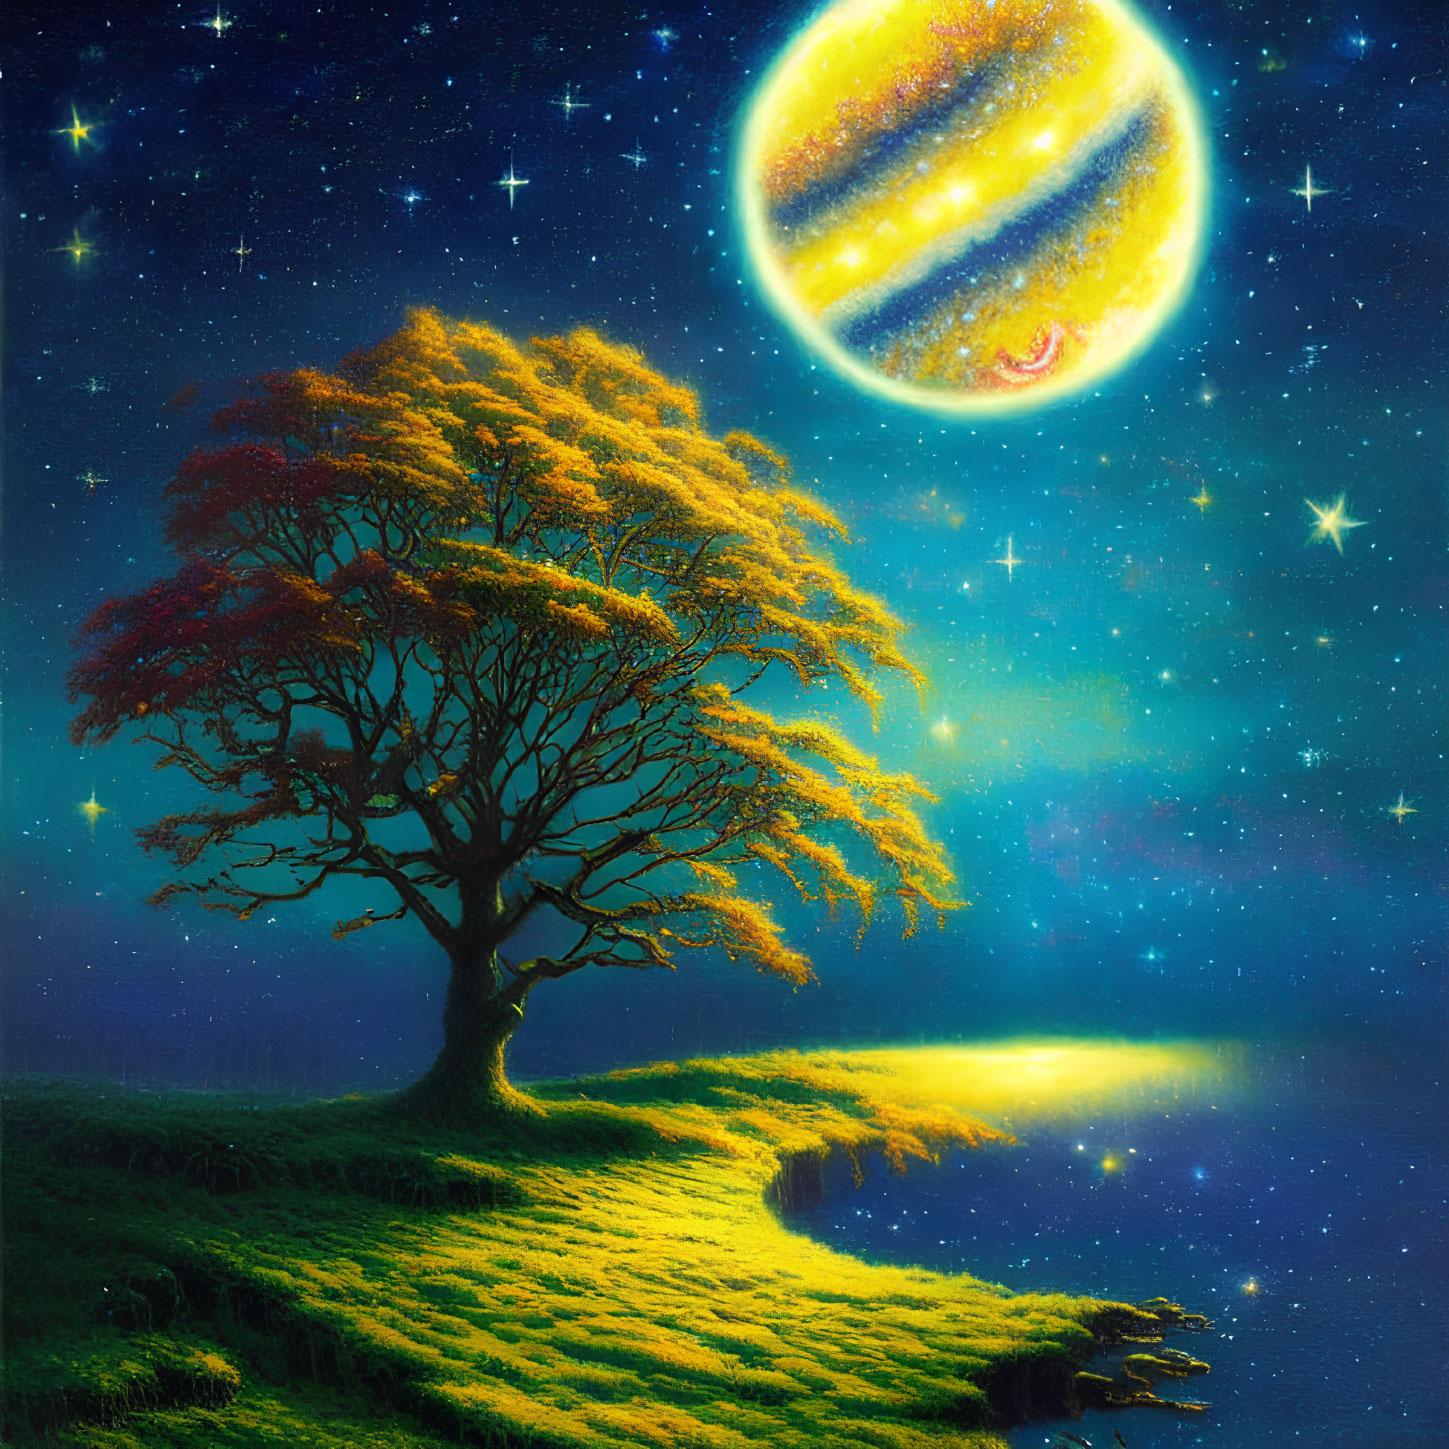 Vibrant painting of solitary tree on hillside at night with surreal planet and stars